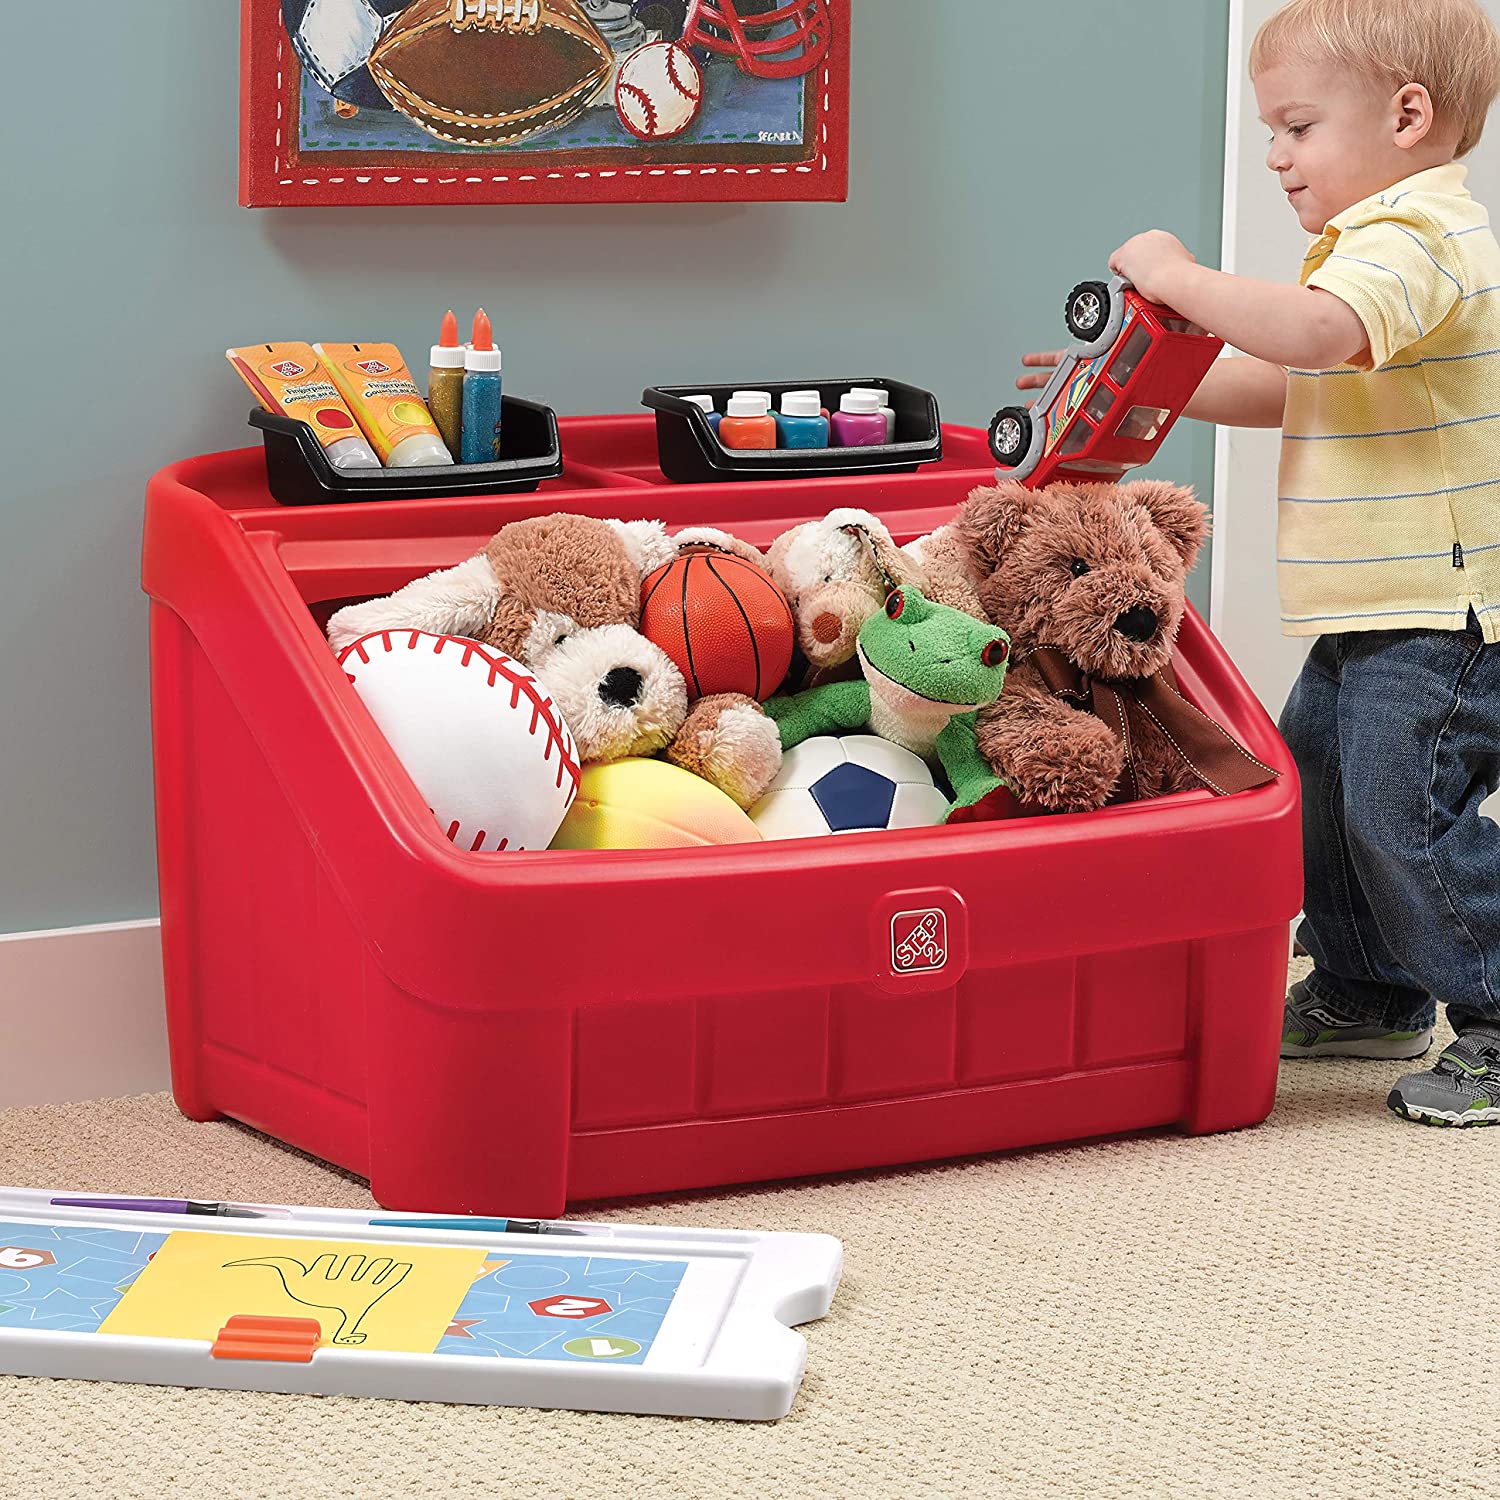 Step2 2-in-1 Toy Box and Art Lid for Kids